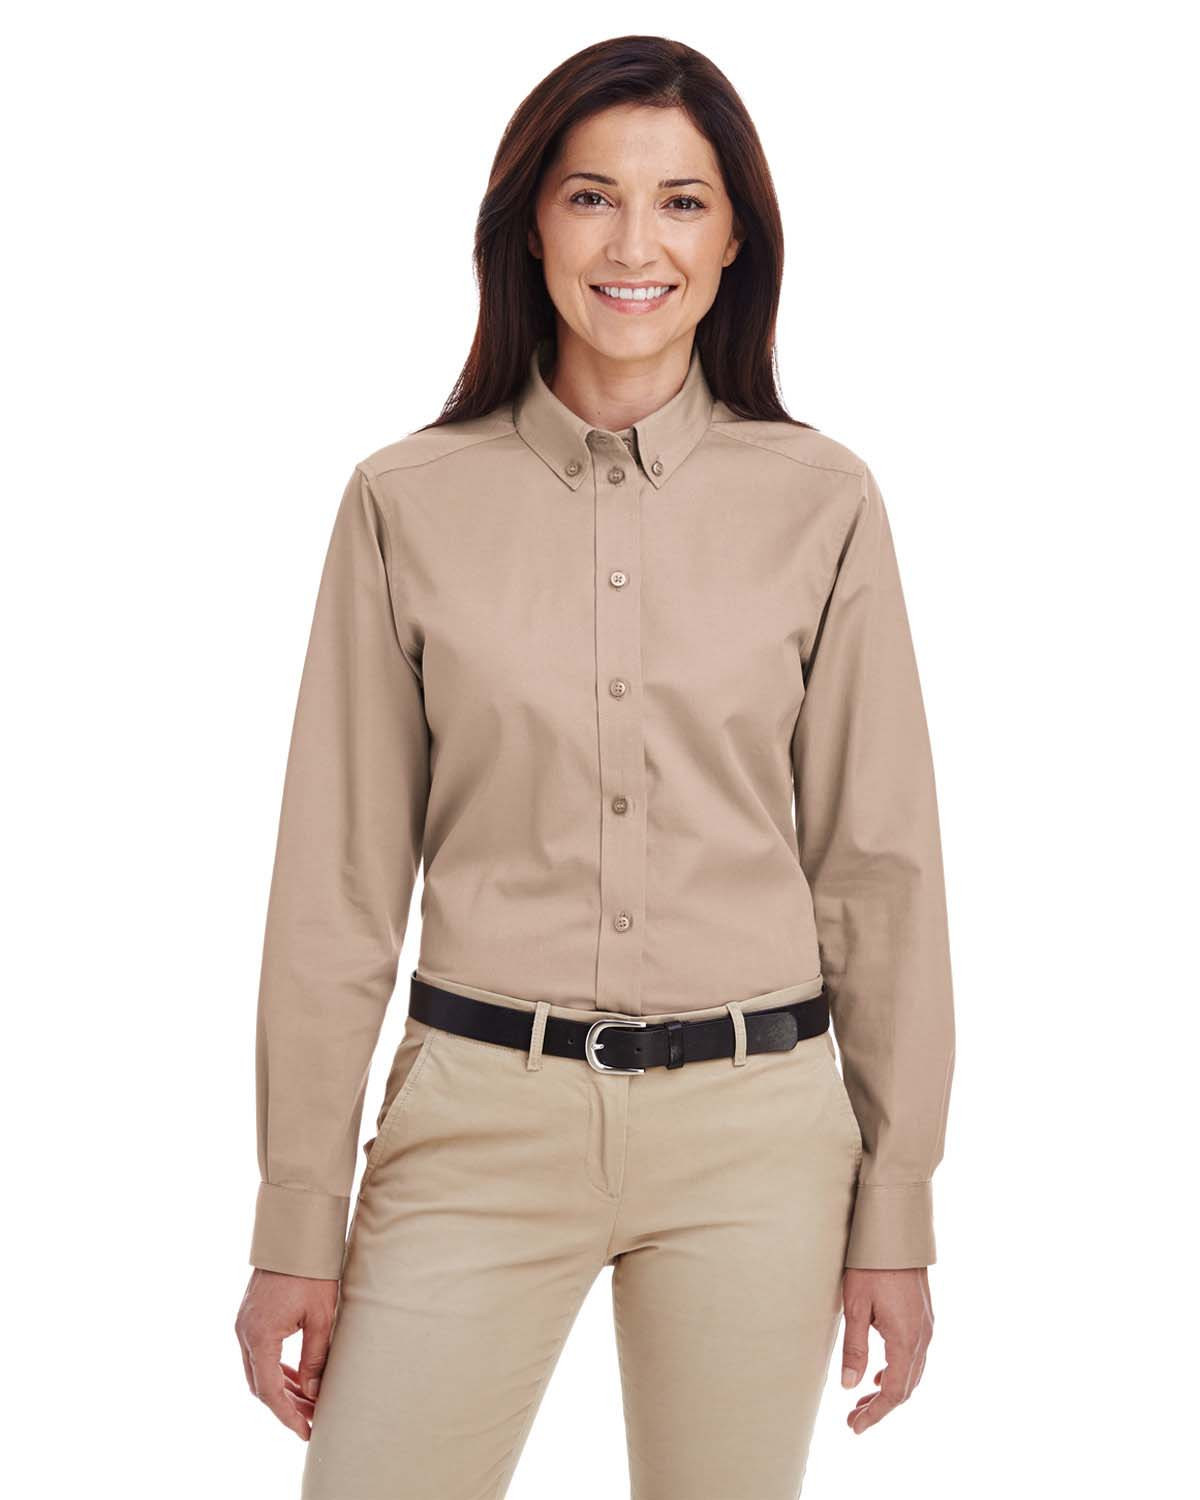 https://cdn11.bigcommerce.com/s-ce94a/images/stencil/1500x1500/products/2574/39093/m581w-harriton-ladies-button-up-shirt-blankclothing.ca-khaki__22246.1683318259.jpg?c=2&imbypass=on